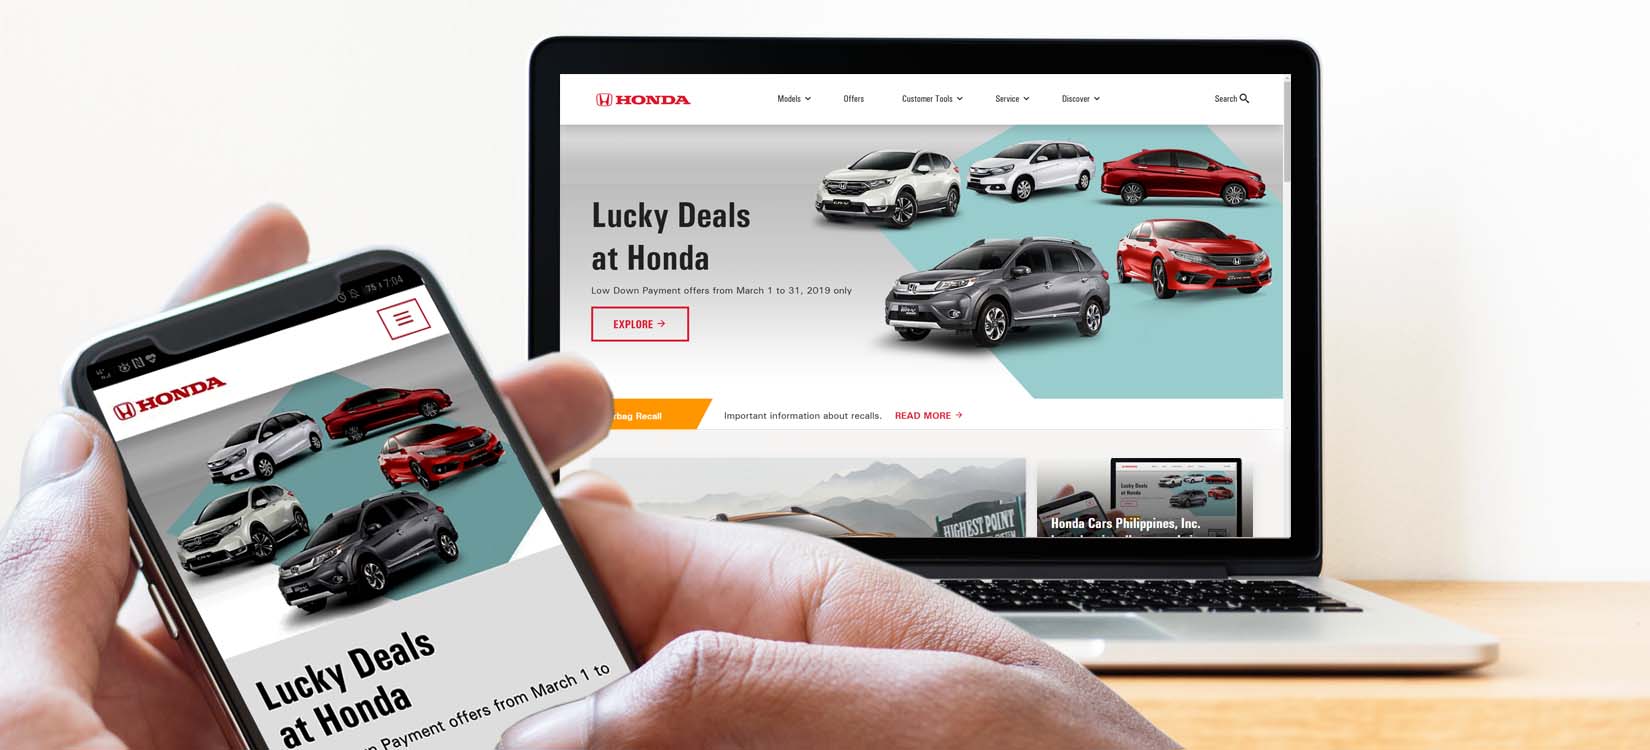 Honda Cars Philippines Honda Cars Philippines Inc Launches Its All New Website